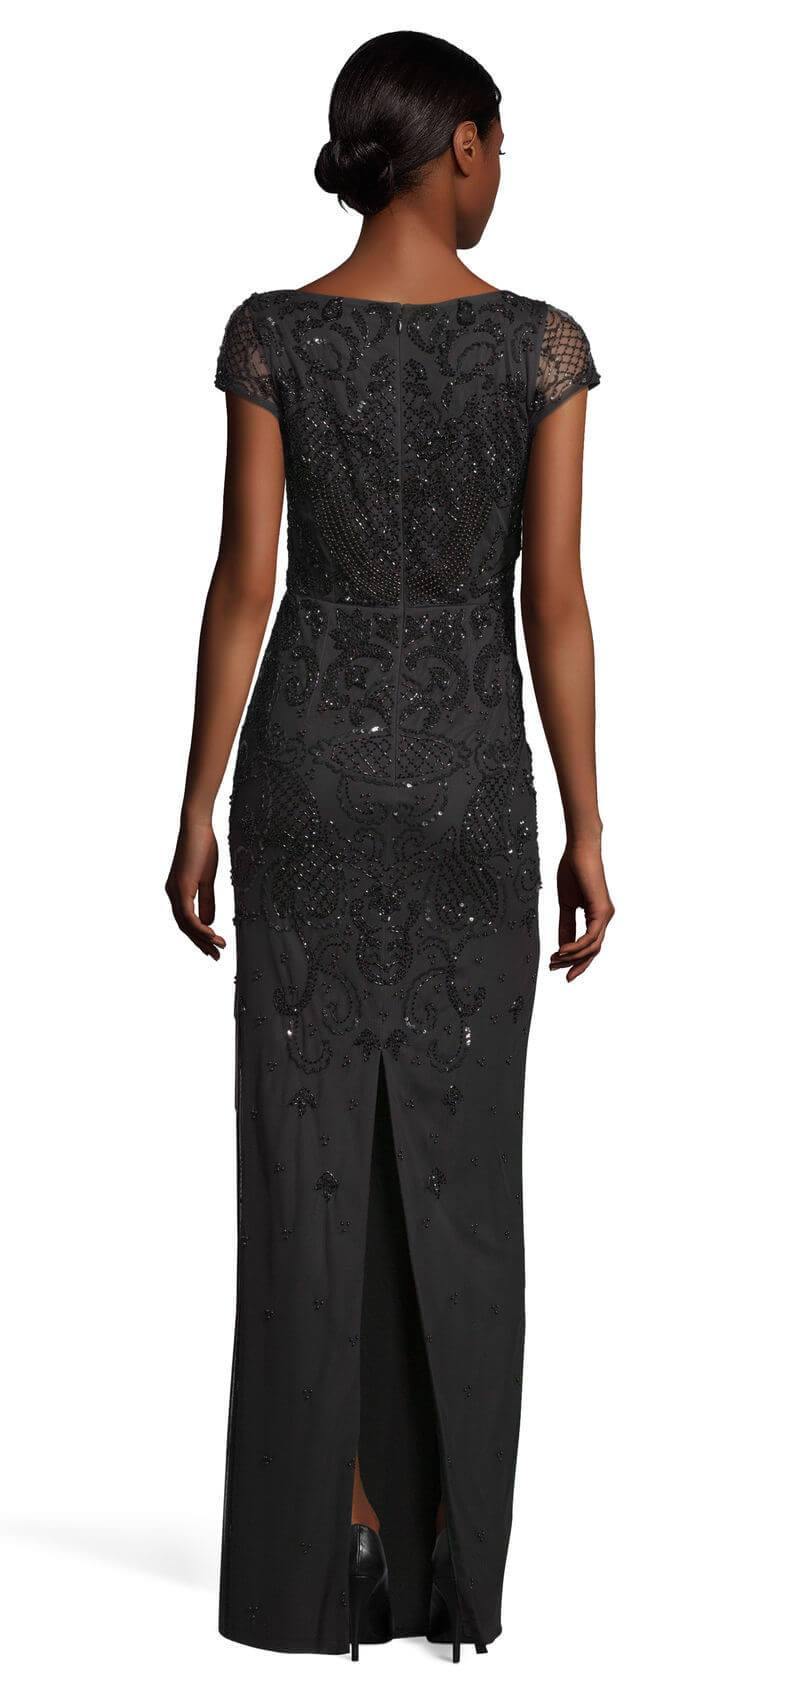 Adrianna Papell Long Formal Short Sleeve Beaded Gown - The Dress Outlet Adrianna Papell